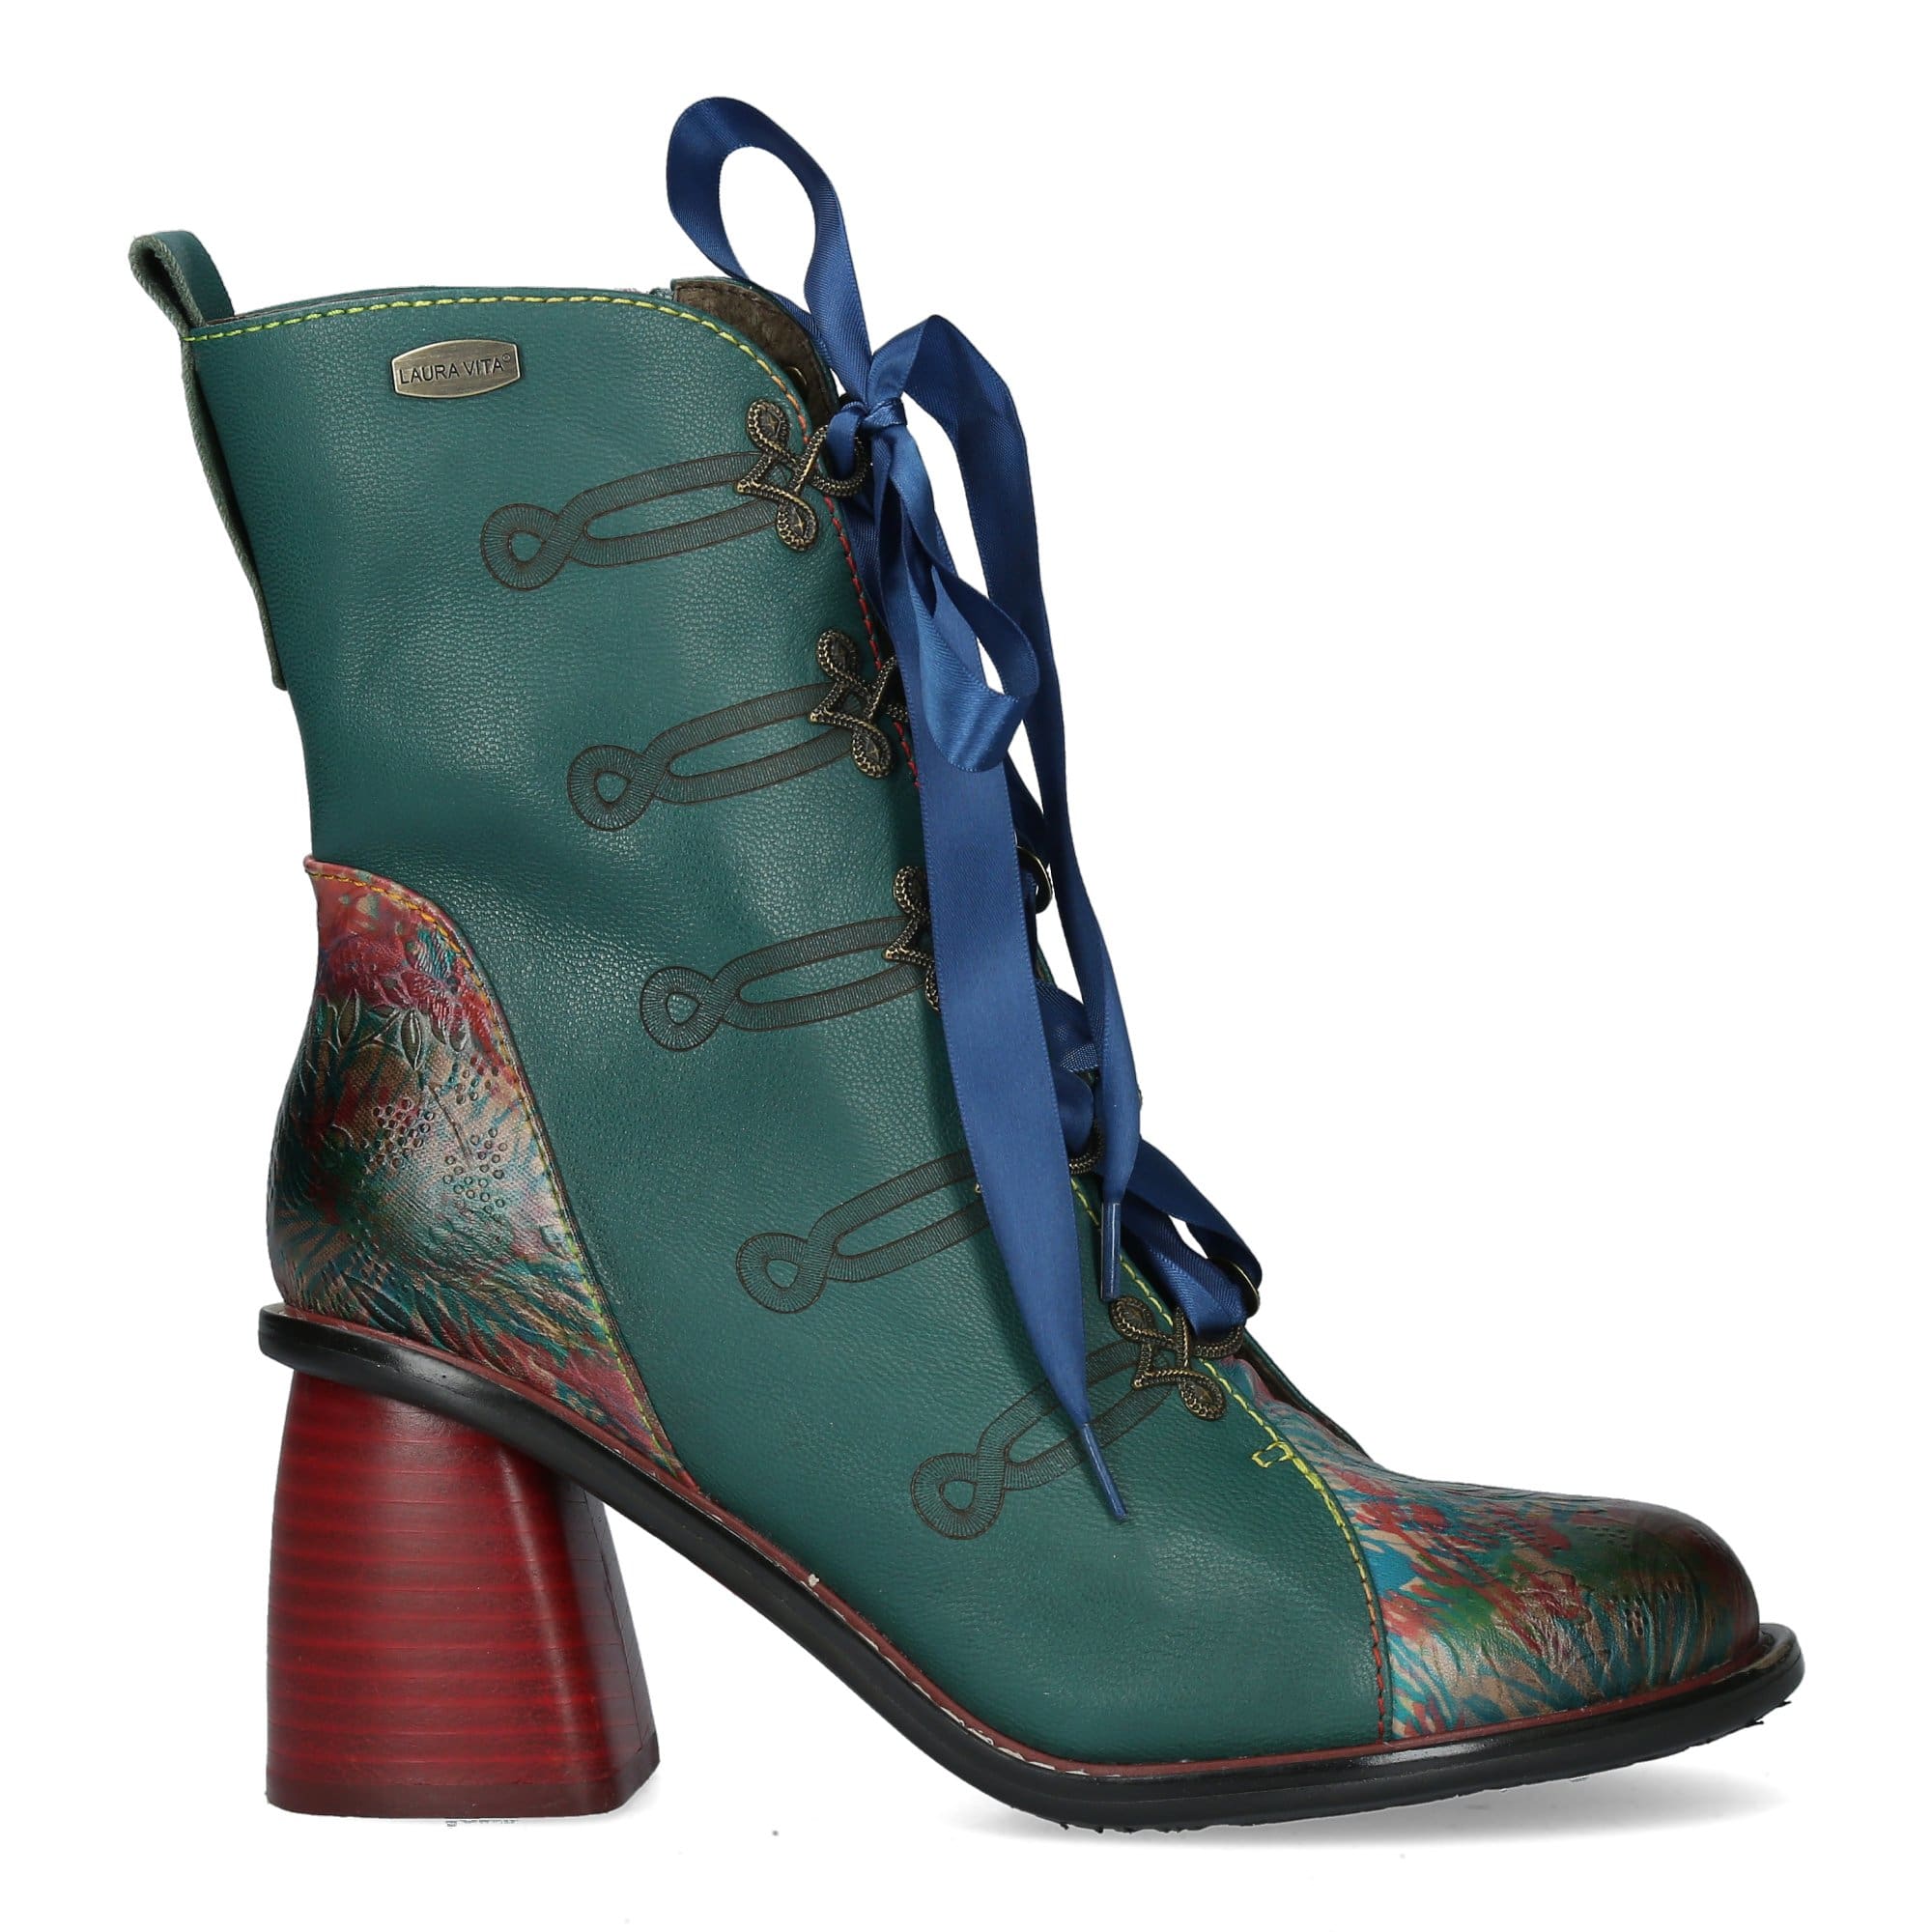 Chaussure EVCAO 01 - 35 / Turquoise - Boots